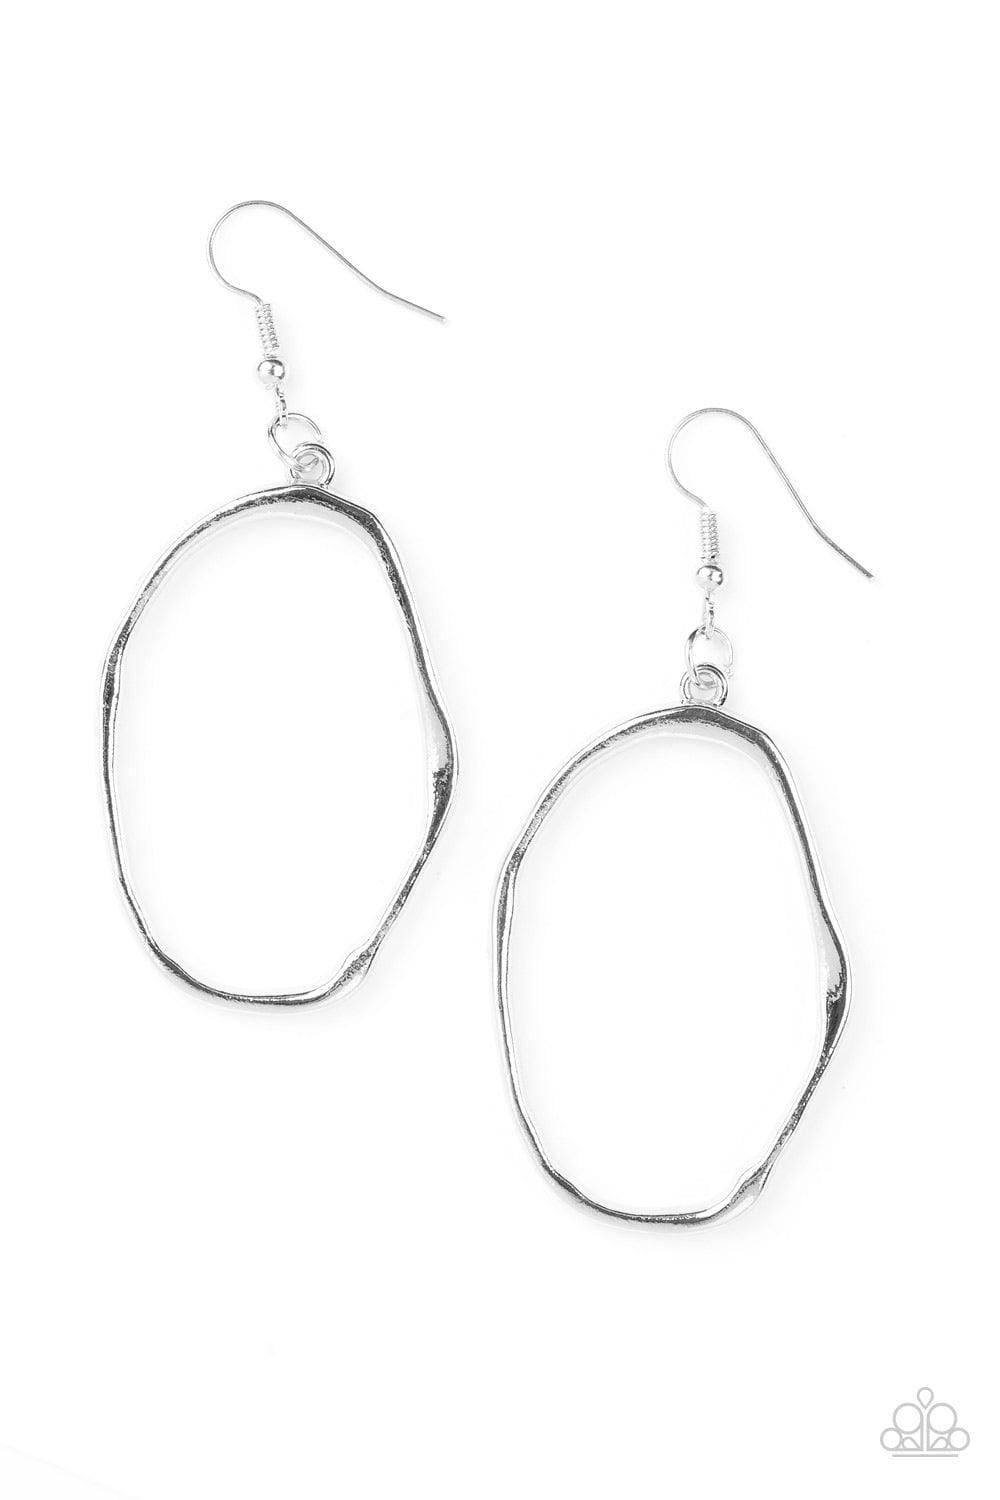 Paparazzi Accessories - Eco Chic - Silver Earrings - Bling by JessieK